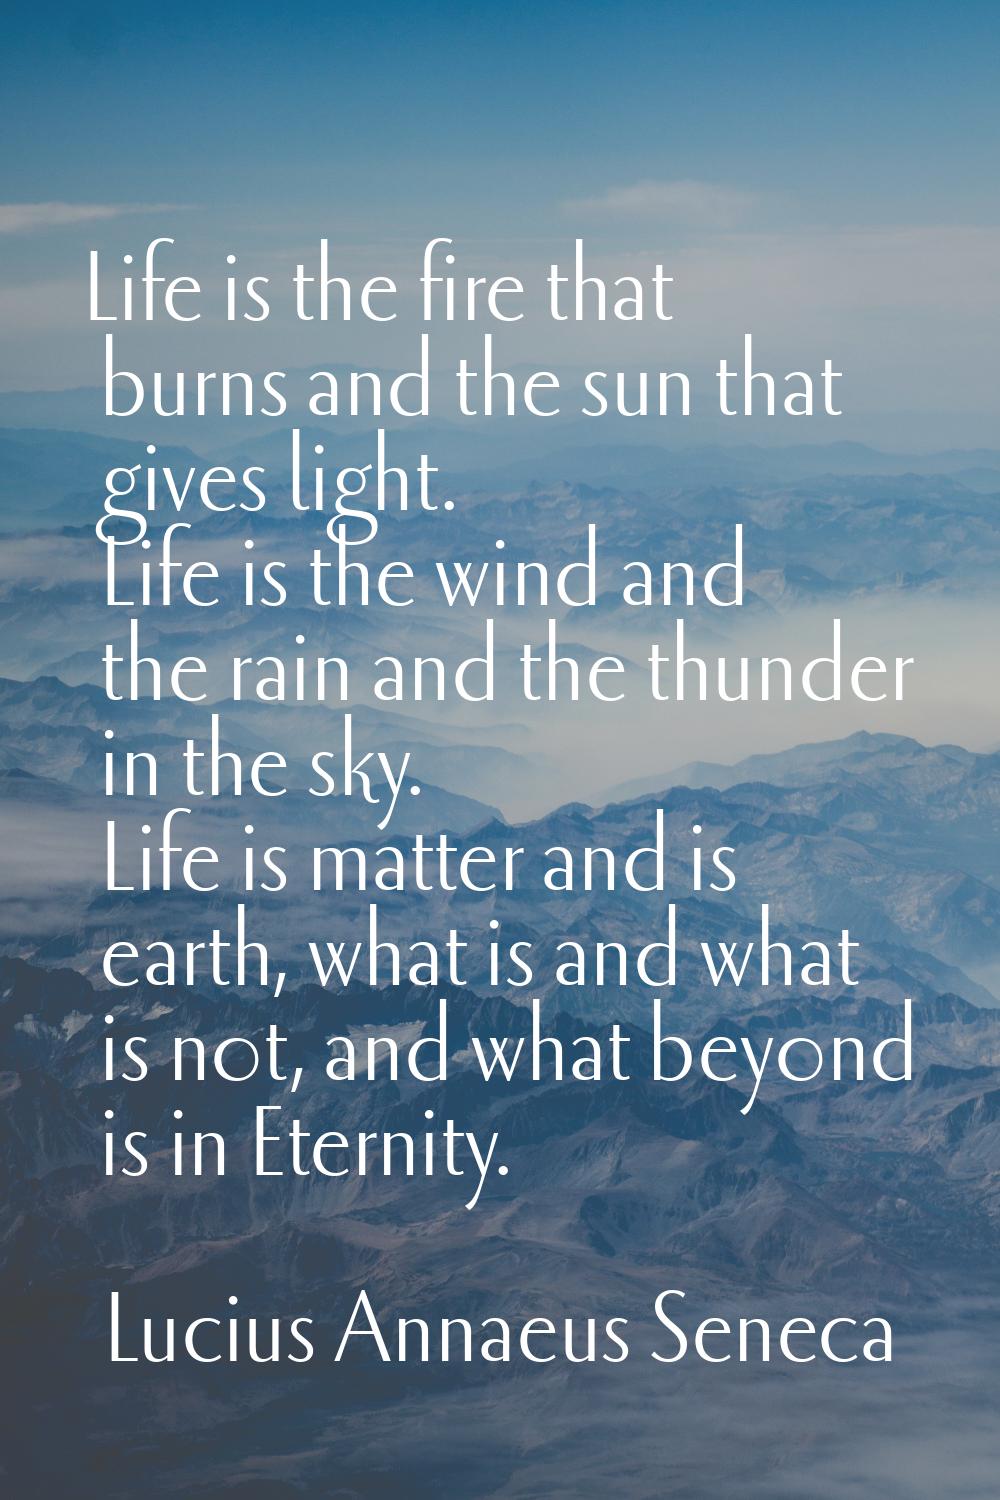 Life is the fire that burns and the sun that gives light. Life is the wind and the rain and the thu